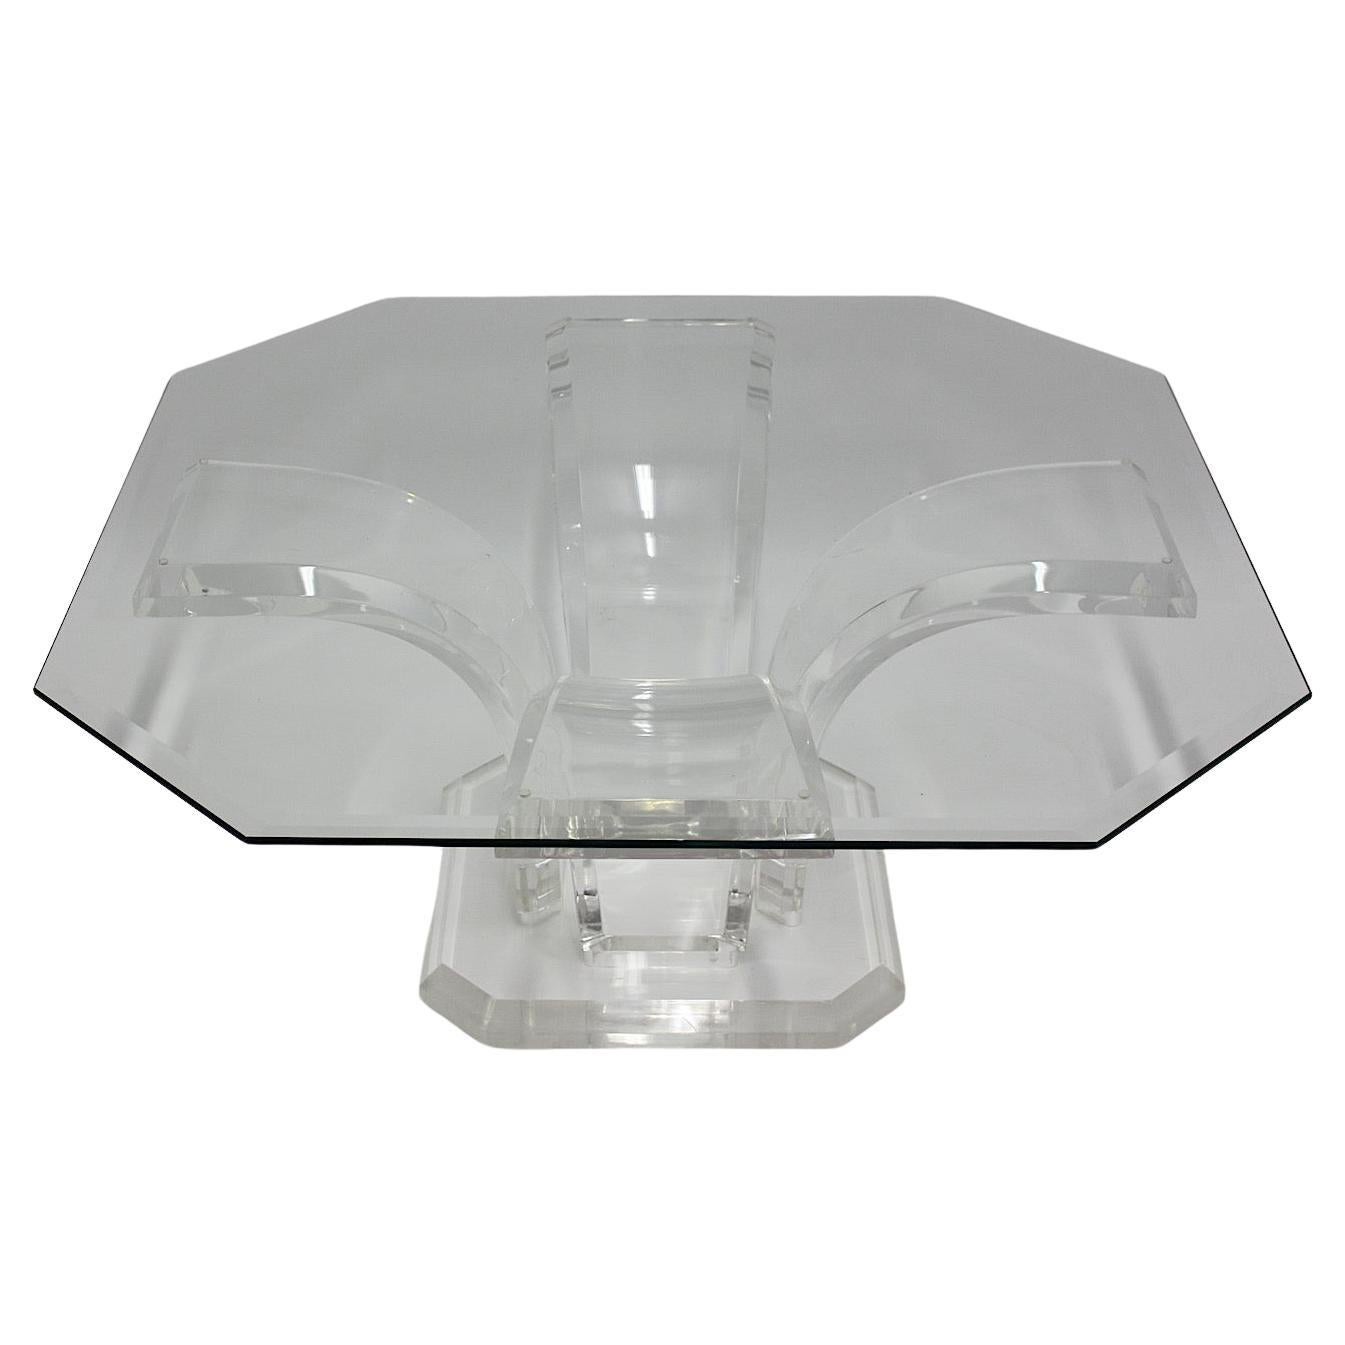 Space Age Vintage Rectangular Transparent Lucite Glass Coffee Table circa 1970 im Angebot